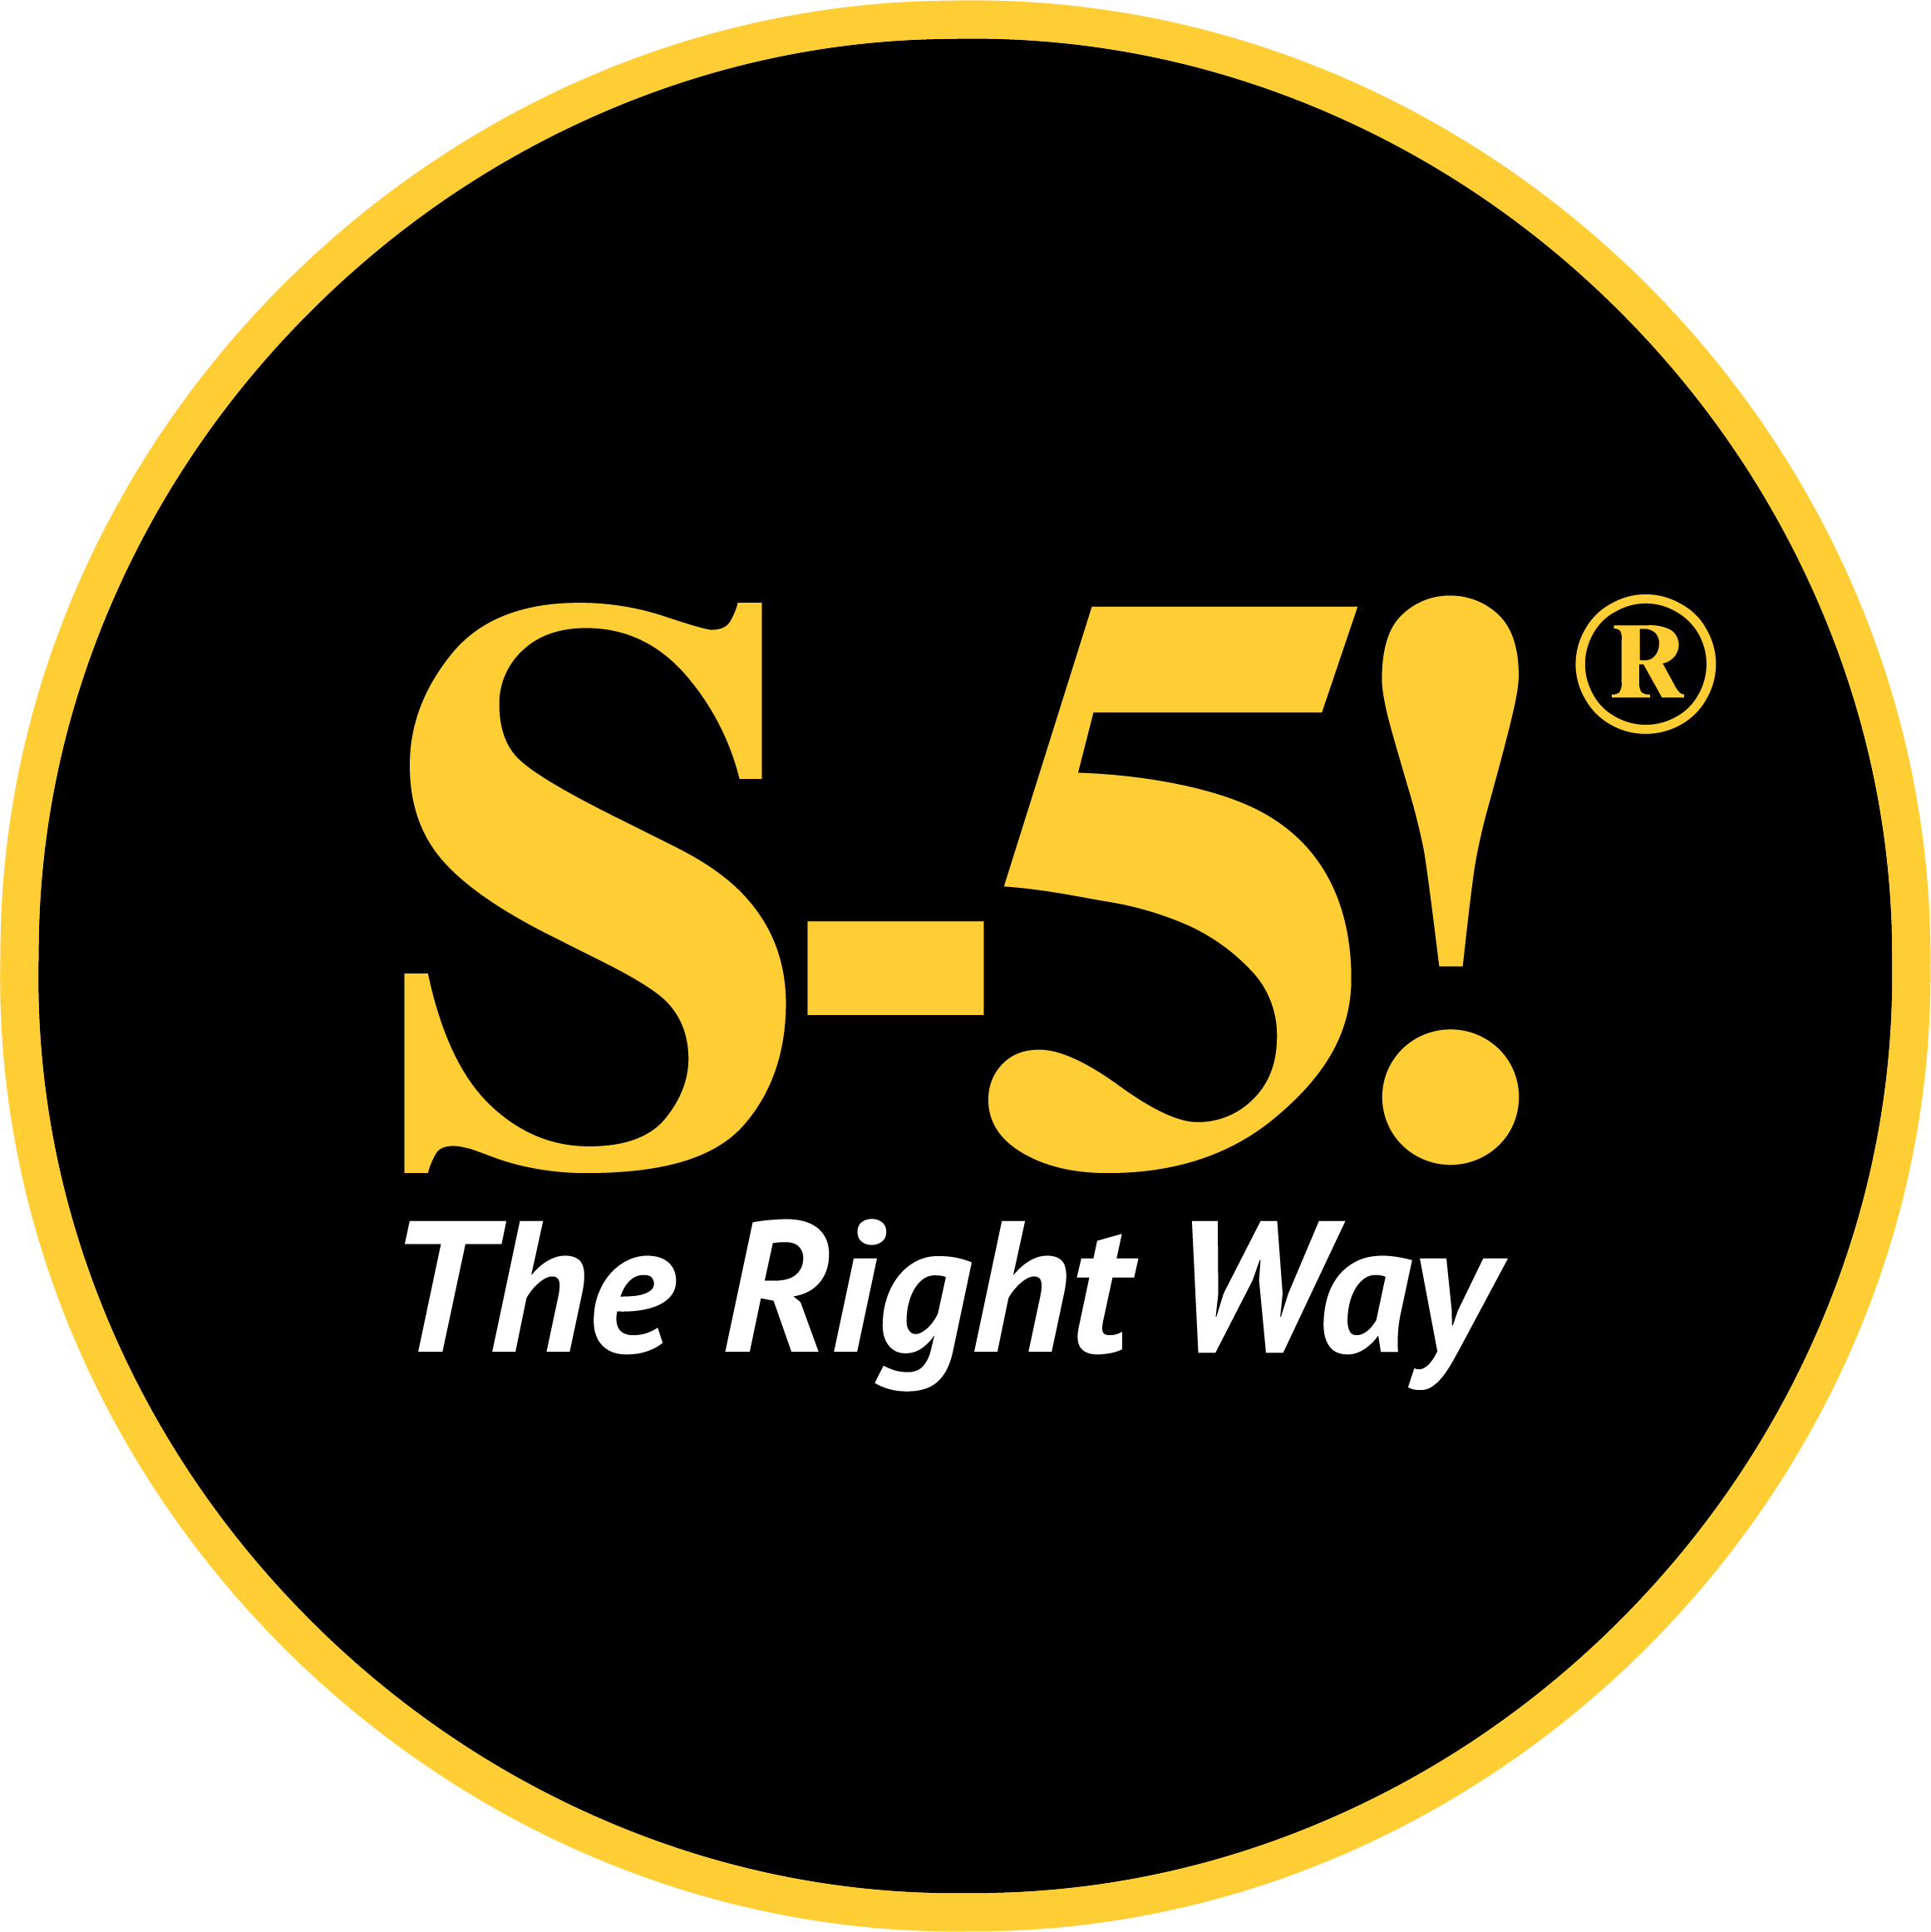 S-5® The Right Way® Black and Yellow Logo